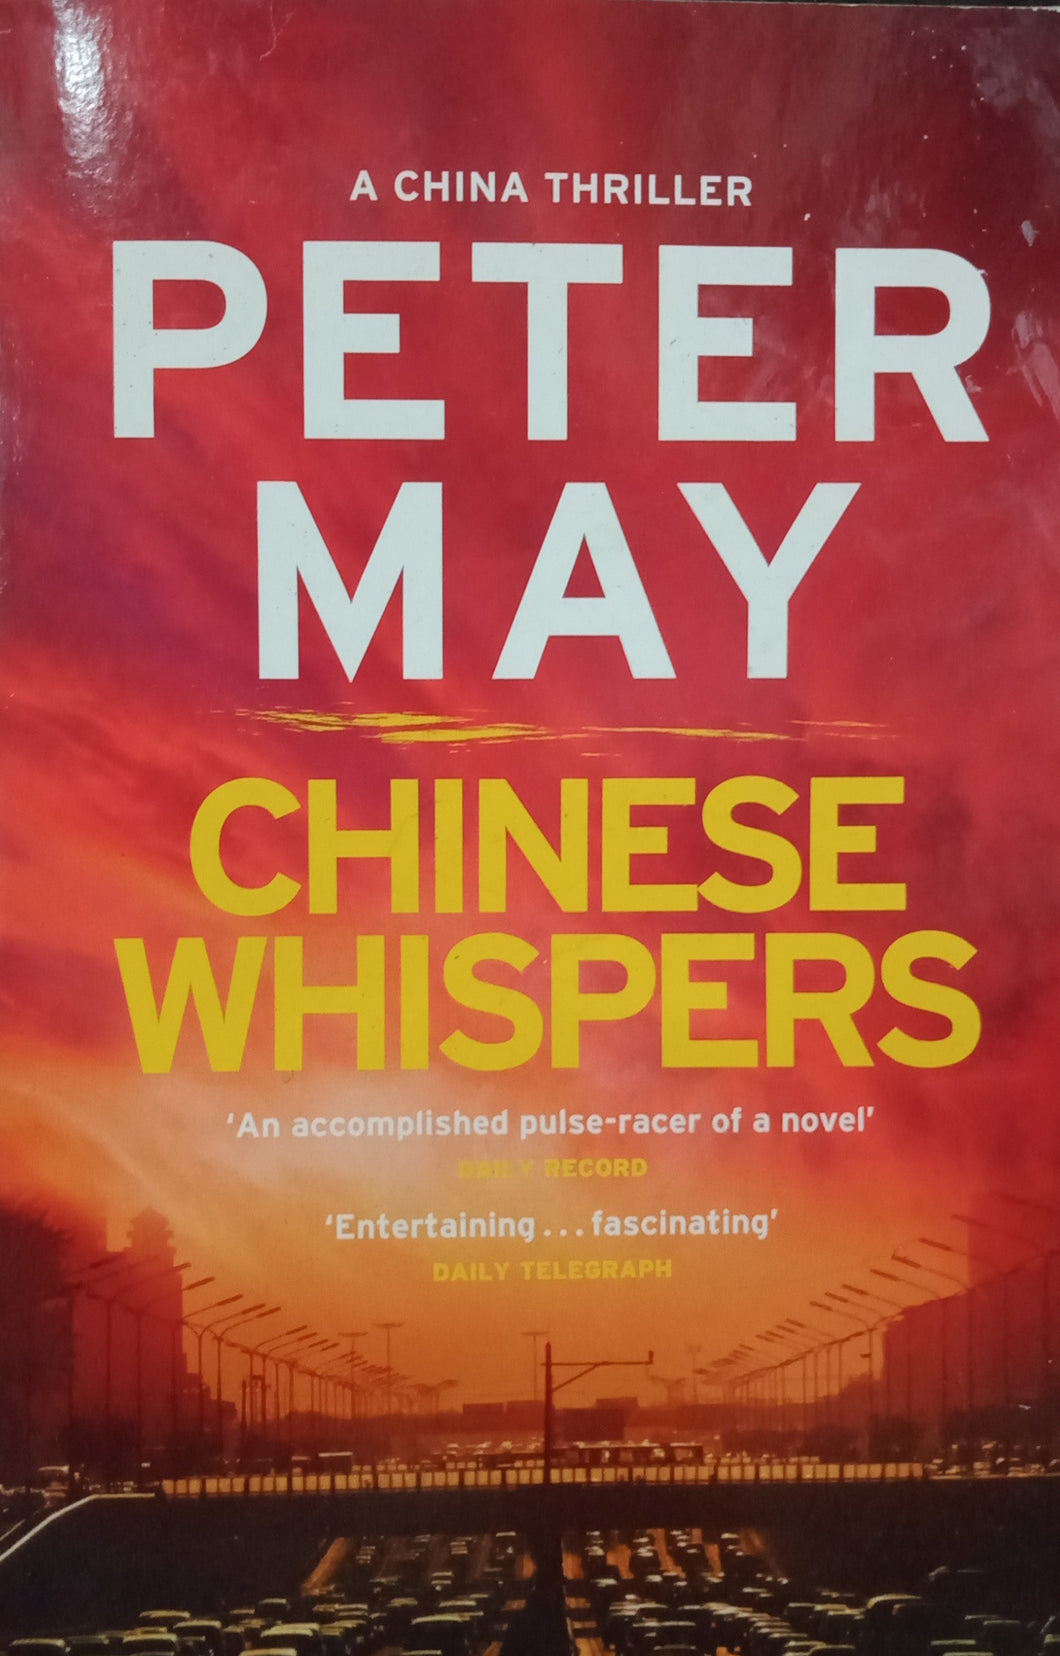 Chinese Whisperers by Peter May